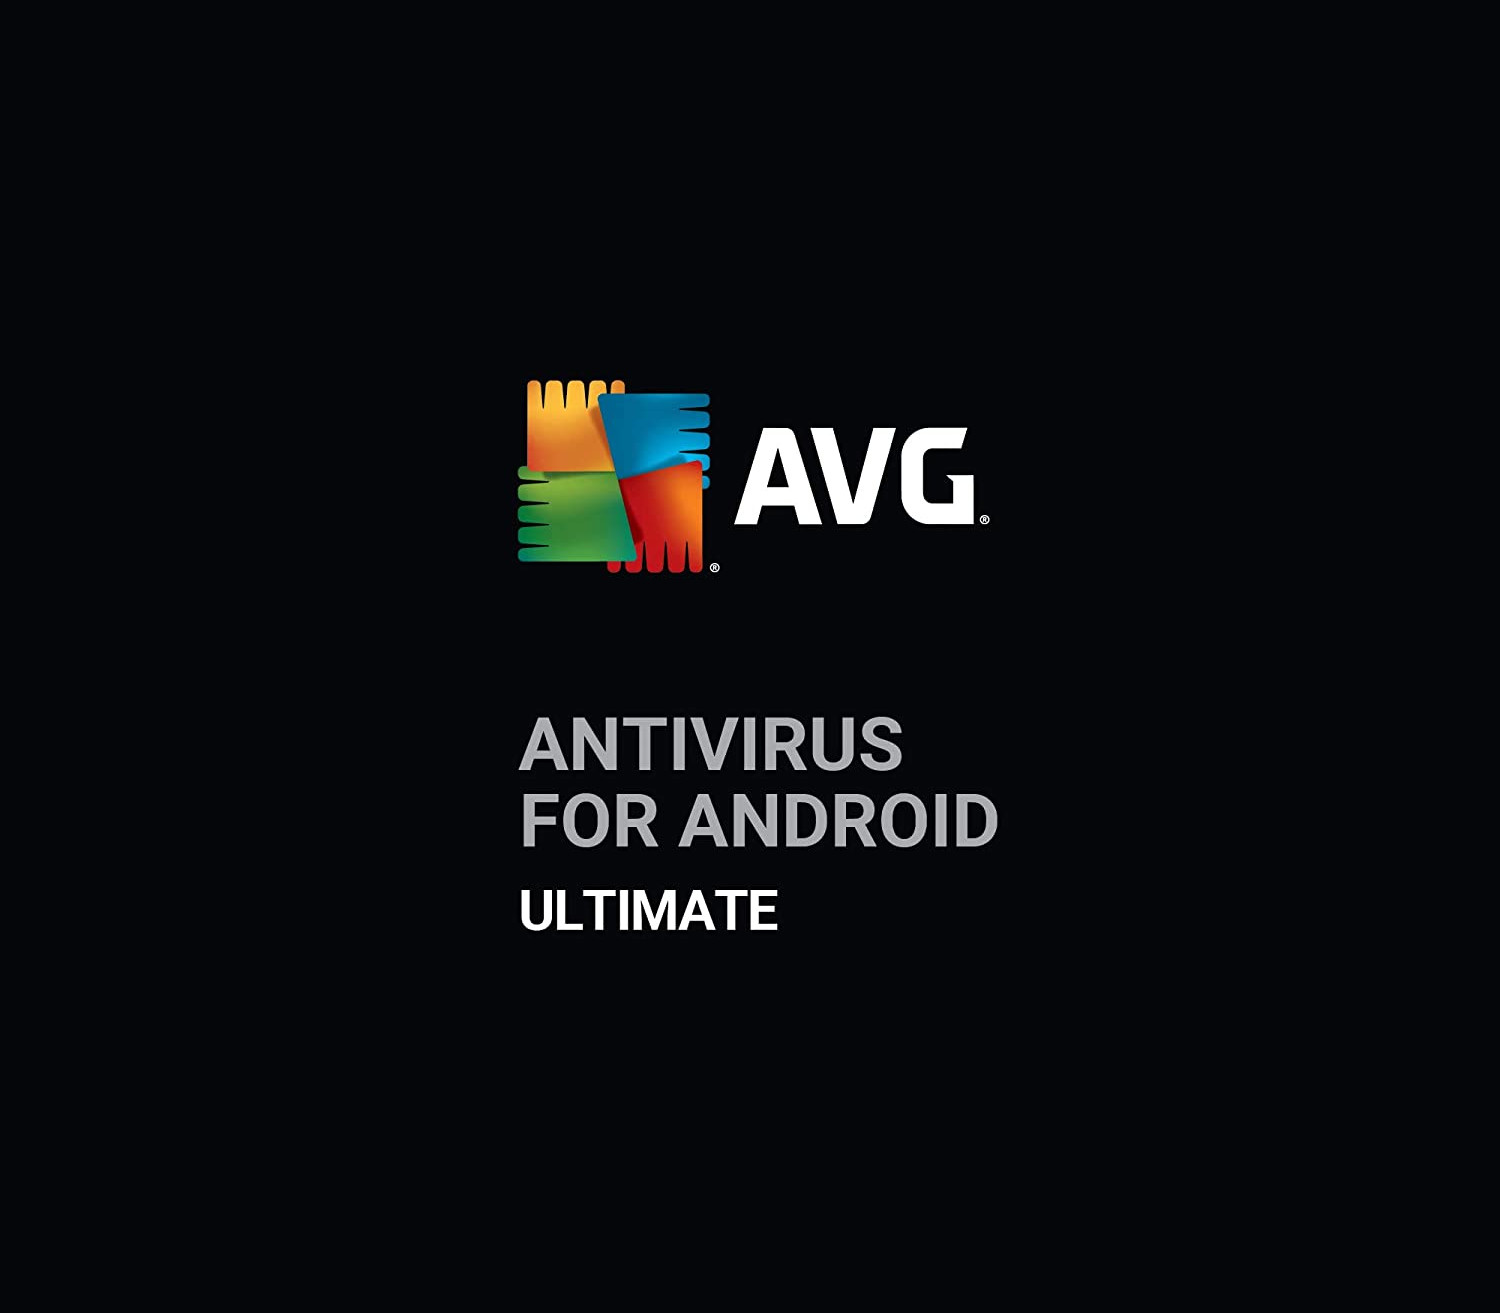 AVG Antivirus for Android - Ultimate Key (1 Year / 1 Device) $6.84